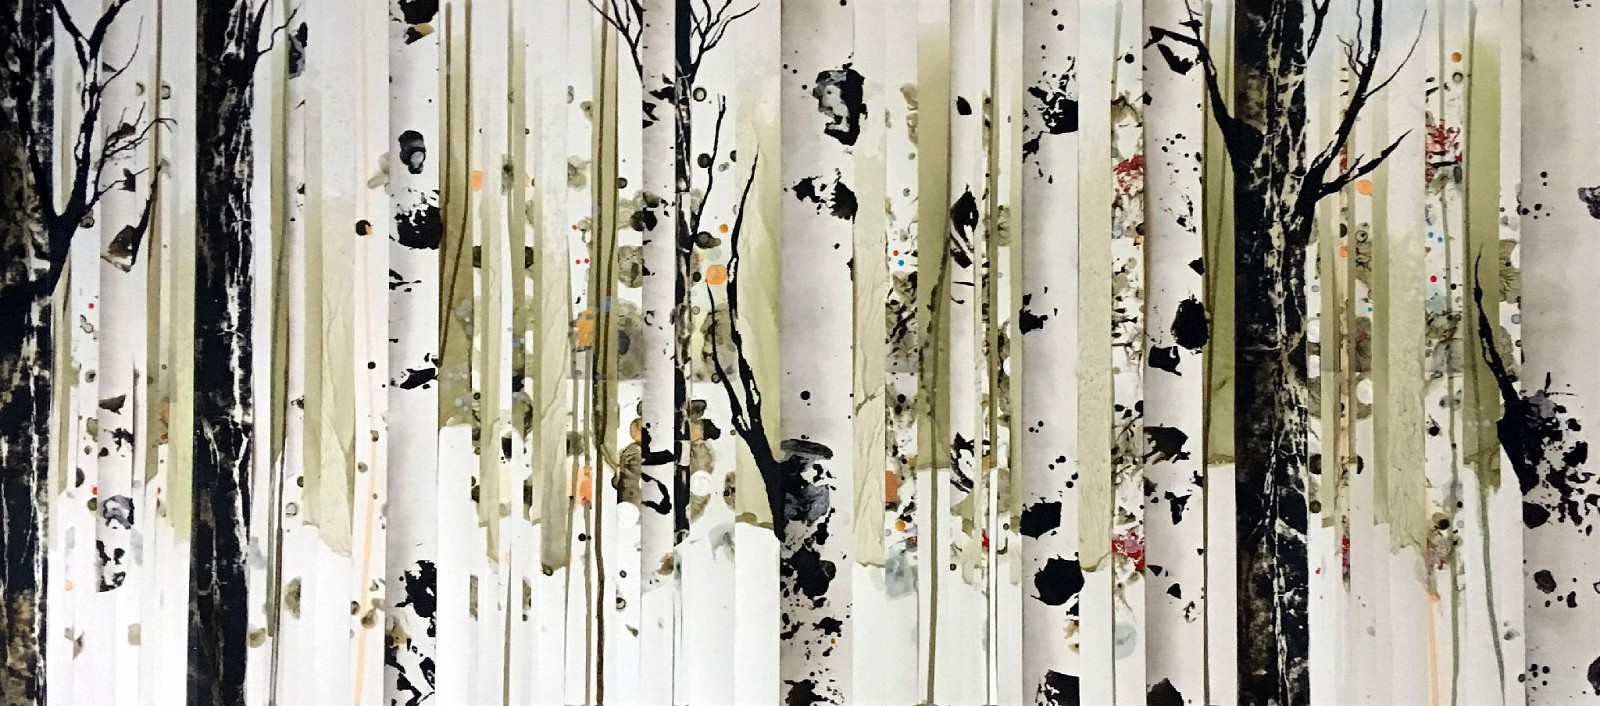 Anastasia Kimmett, Snow Hushed 5
Ink and Pastel on Paper Mounted on Panel, 21 x 47 in.
7191
&bull;